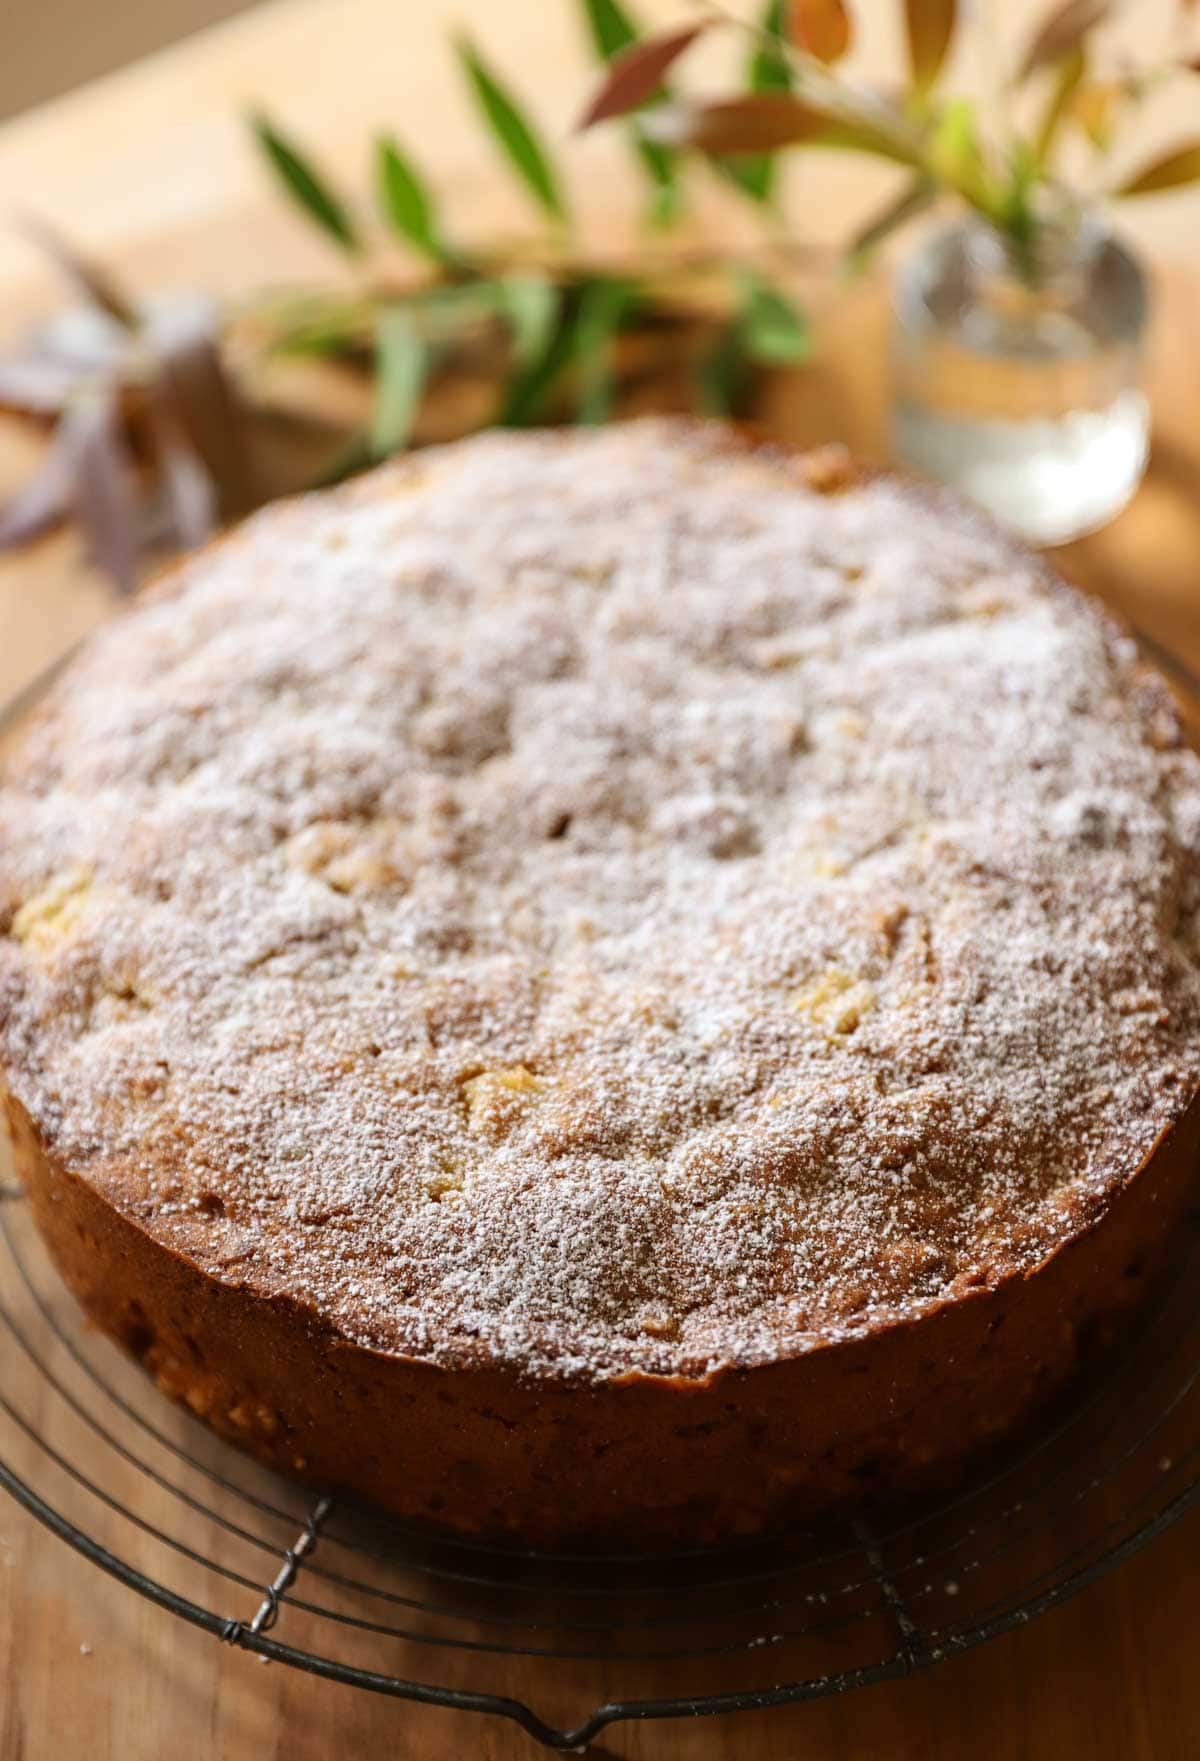 A fully baked cake on a cooling rack with a dusting of powdered sugar.